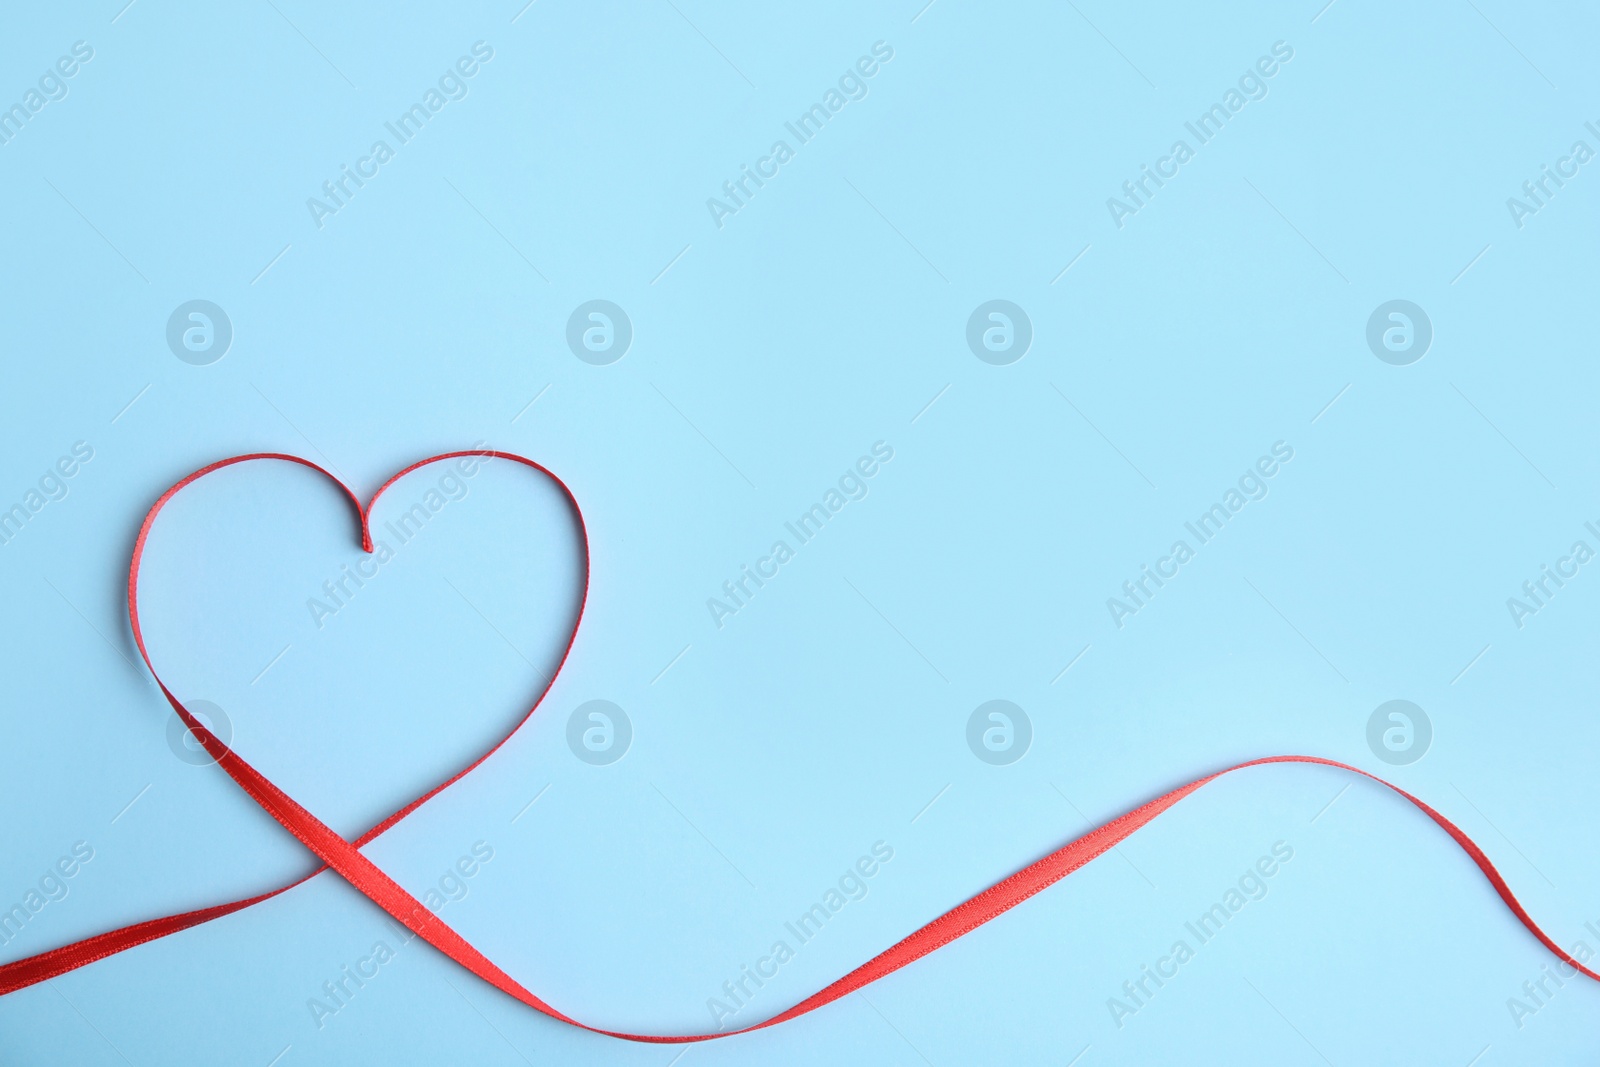 Photo of Heart made of red ribbon on light blue background, top view with space for text. Valentine's day celebration